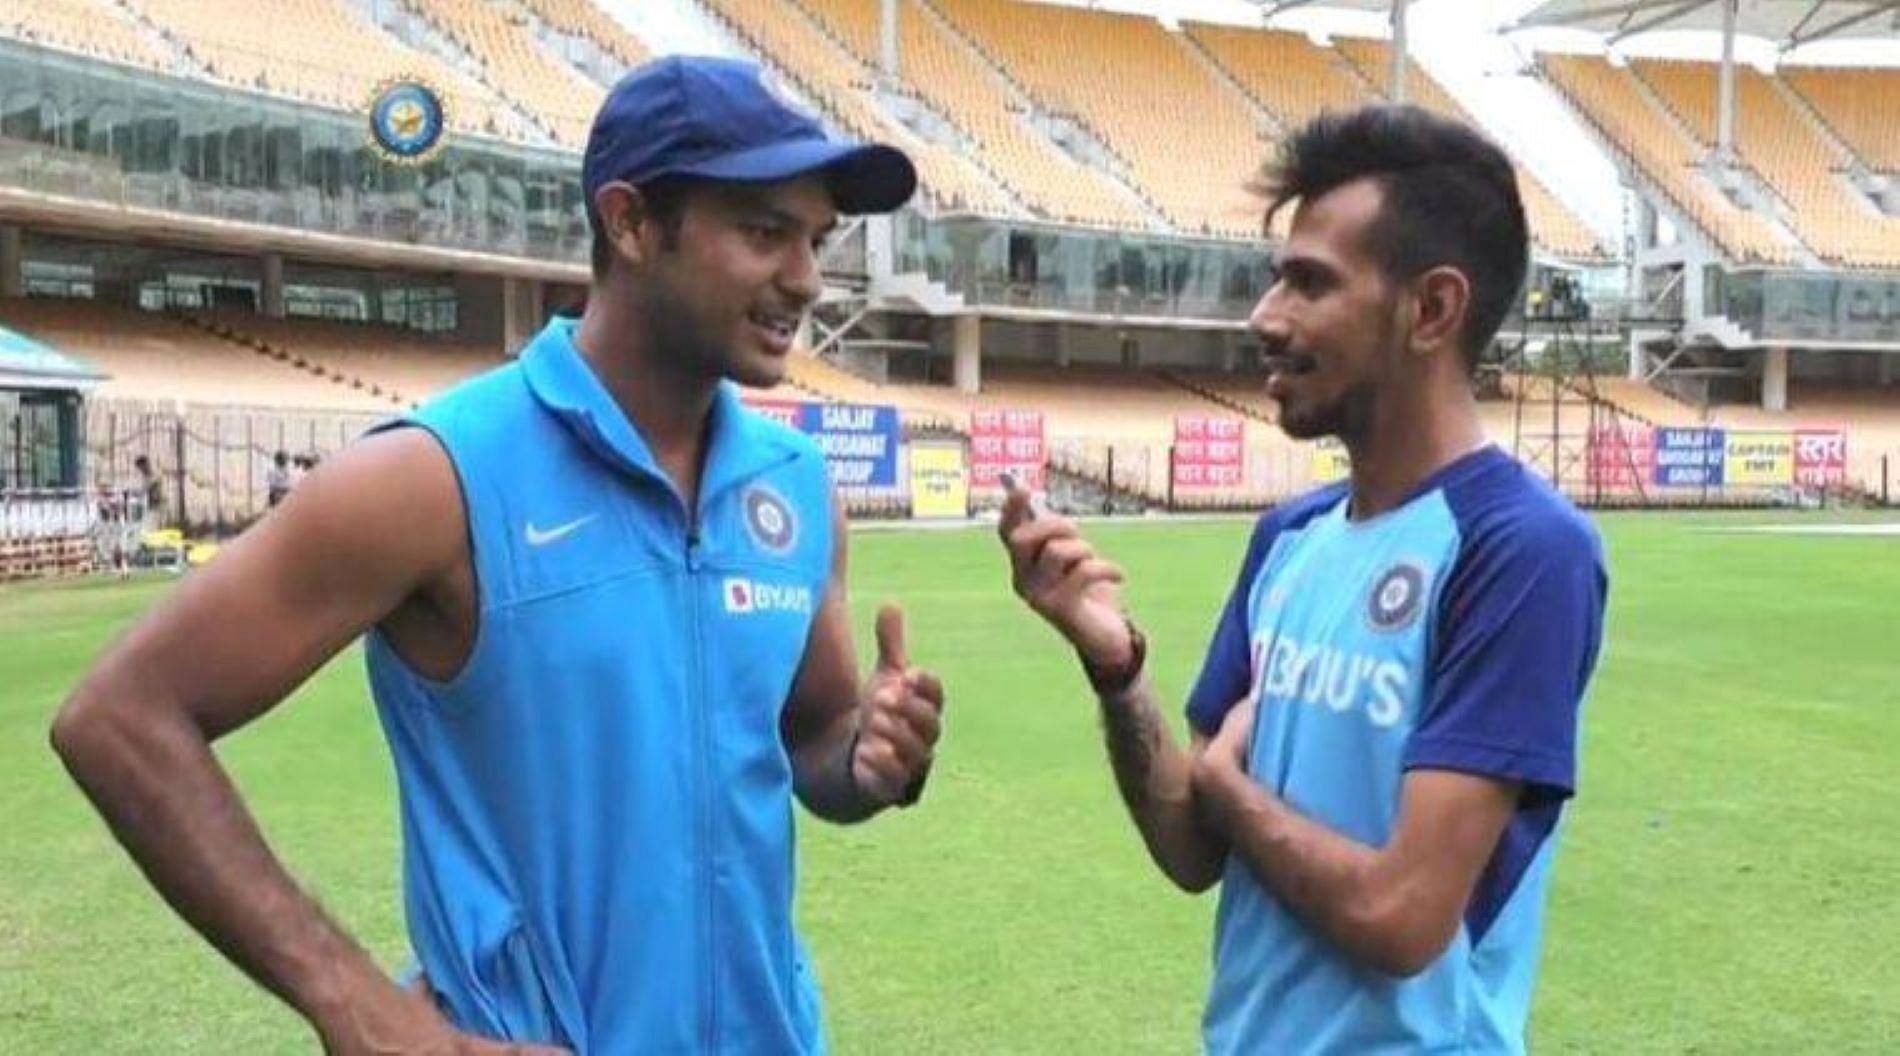 Mayank Agarwal and Yuzvendra Chahal would be hoping to help SRH and RR win the IPL title in 2023